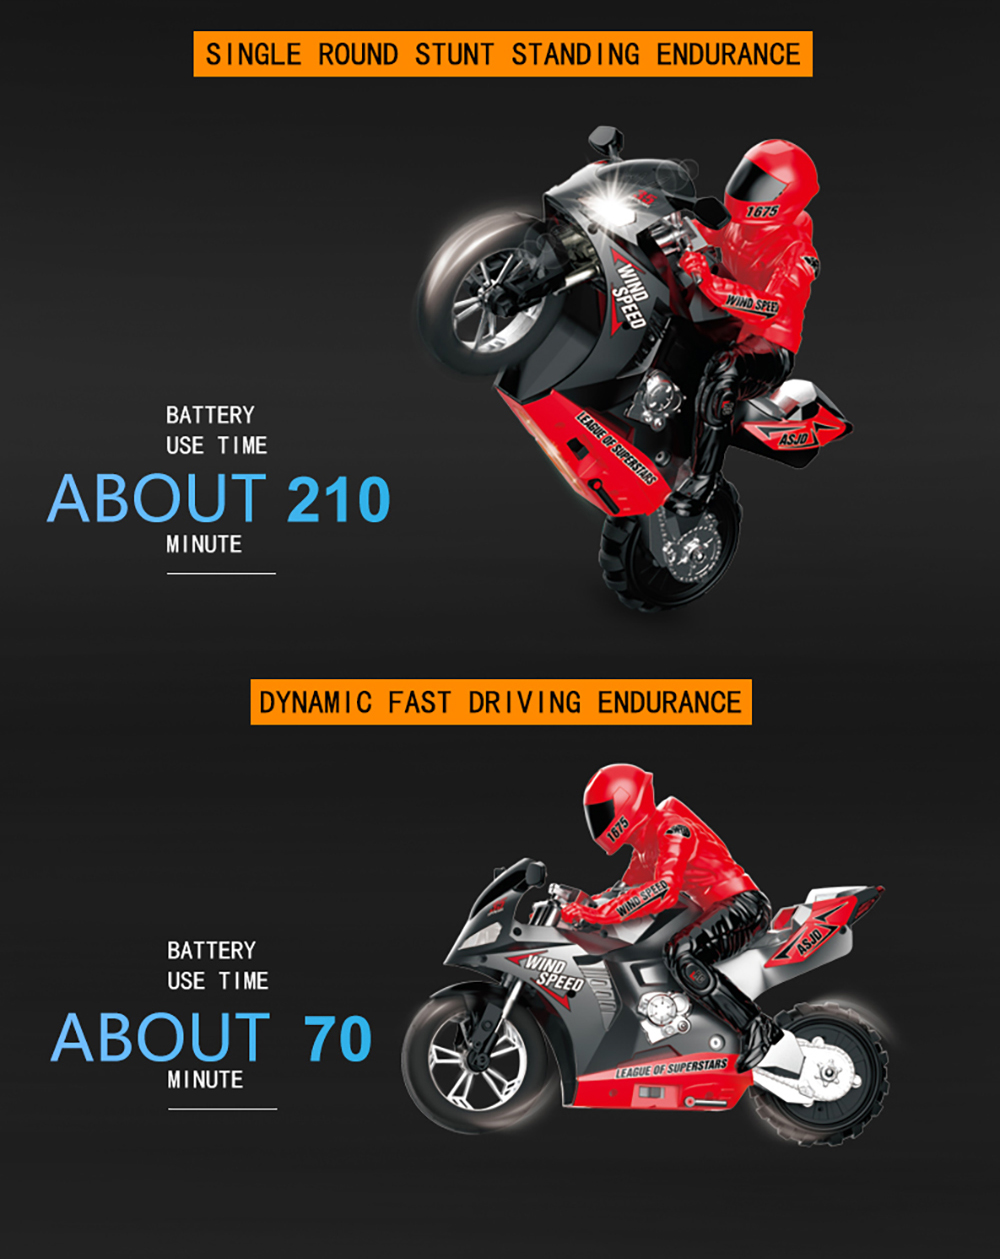 HC-801 2.4G 35CM RC Motorcycle Stunt Car Vehicle Models RTR High Speed 20km/h 210min Use Time - Photo: 6